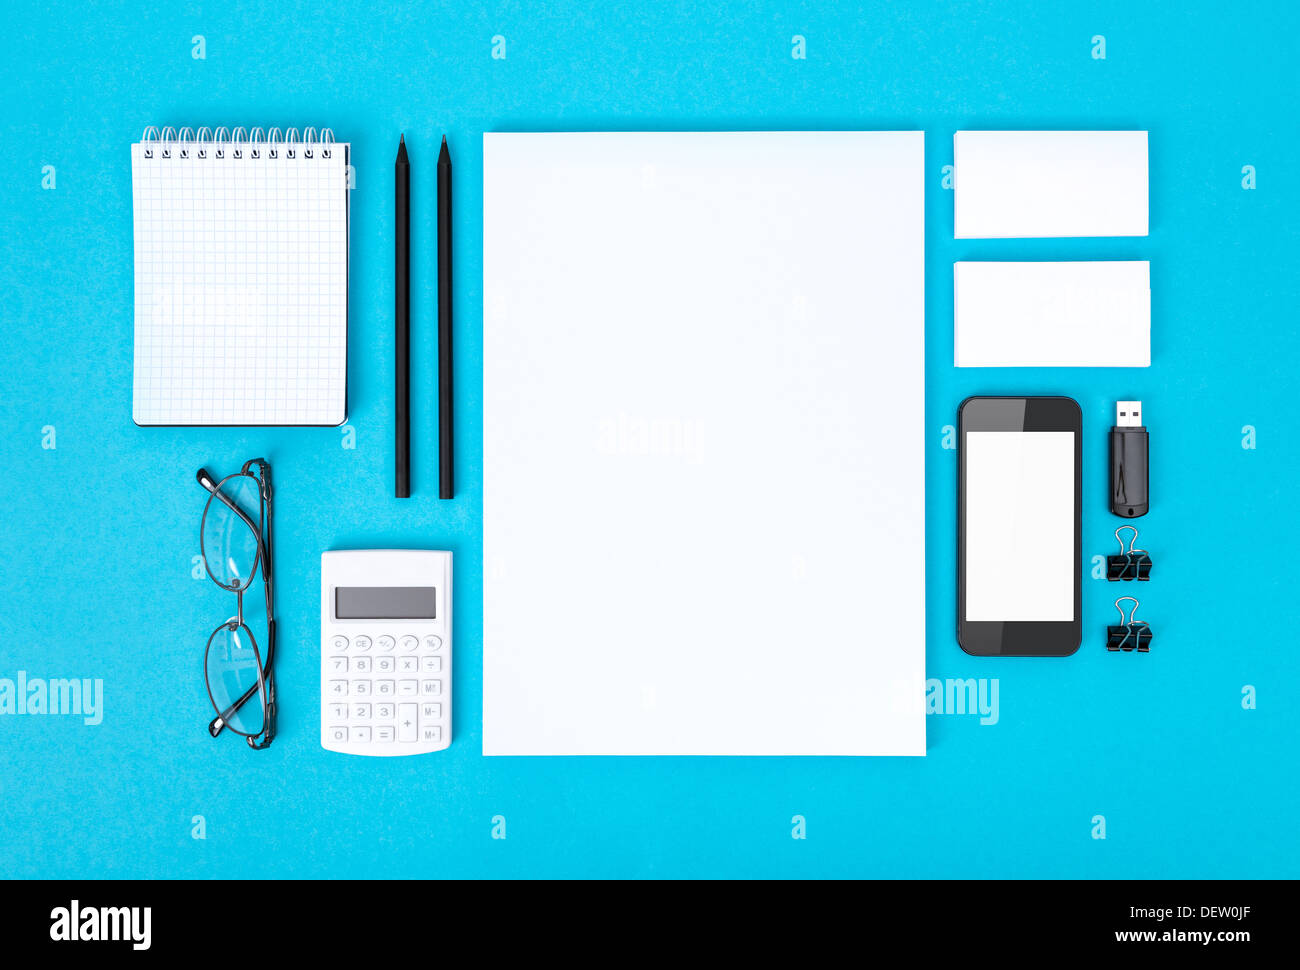 Set of variety blank office objects organized for company presentation or corporate identity. Isolated on blue paper background. Stock Photo